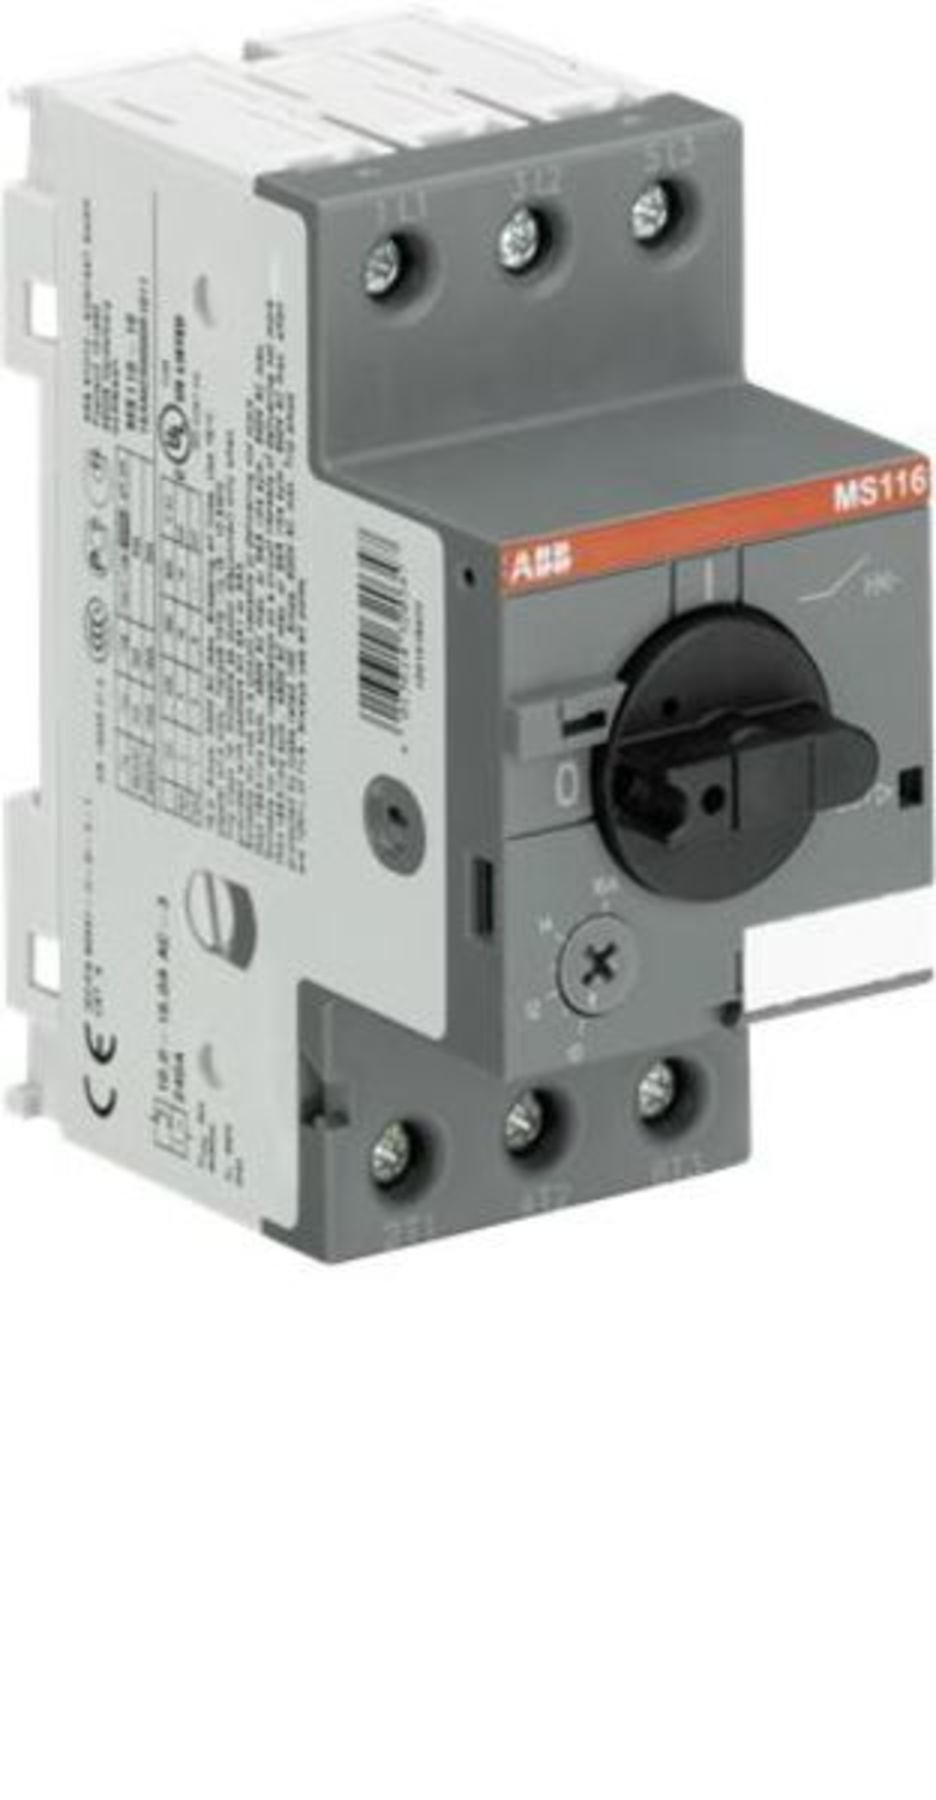 ABB MS116 Motor rated circuit breakers with optional HK1-11 or HKF1-11 auxiliary 